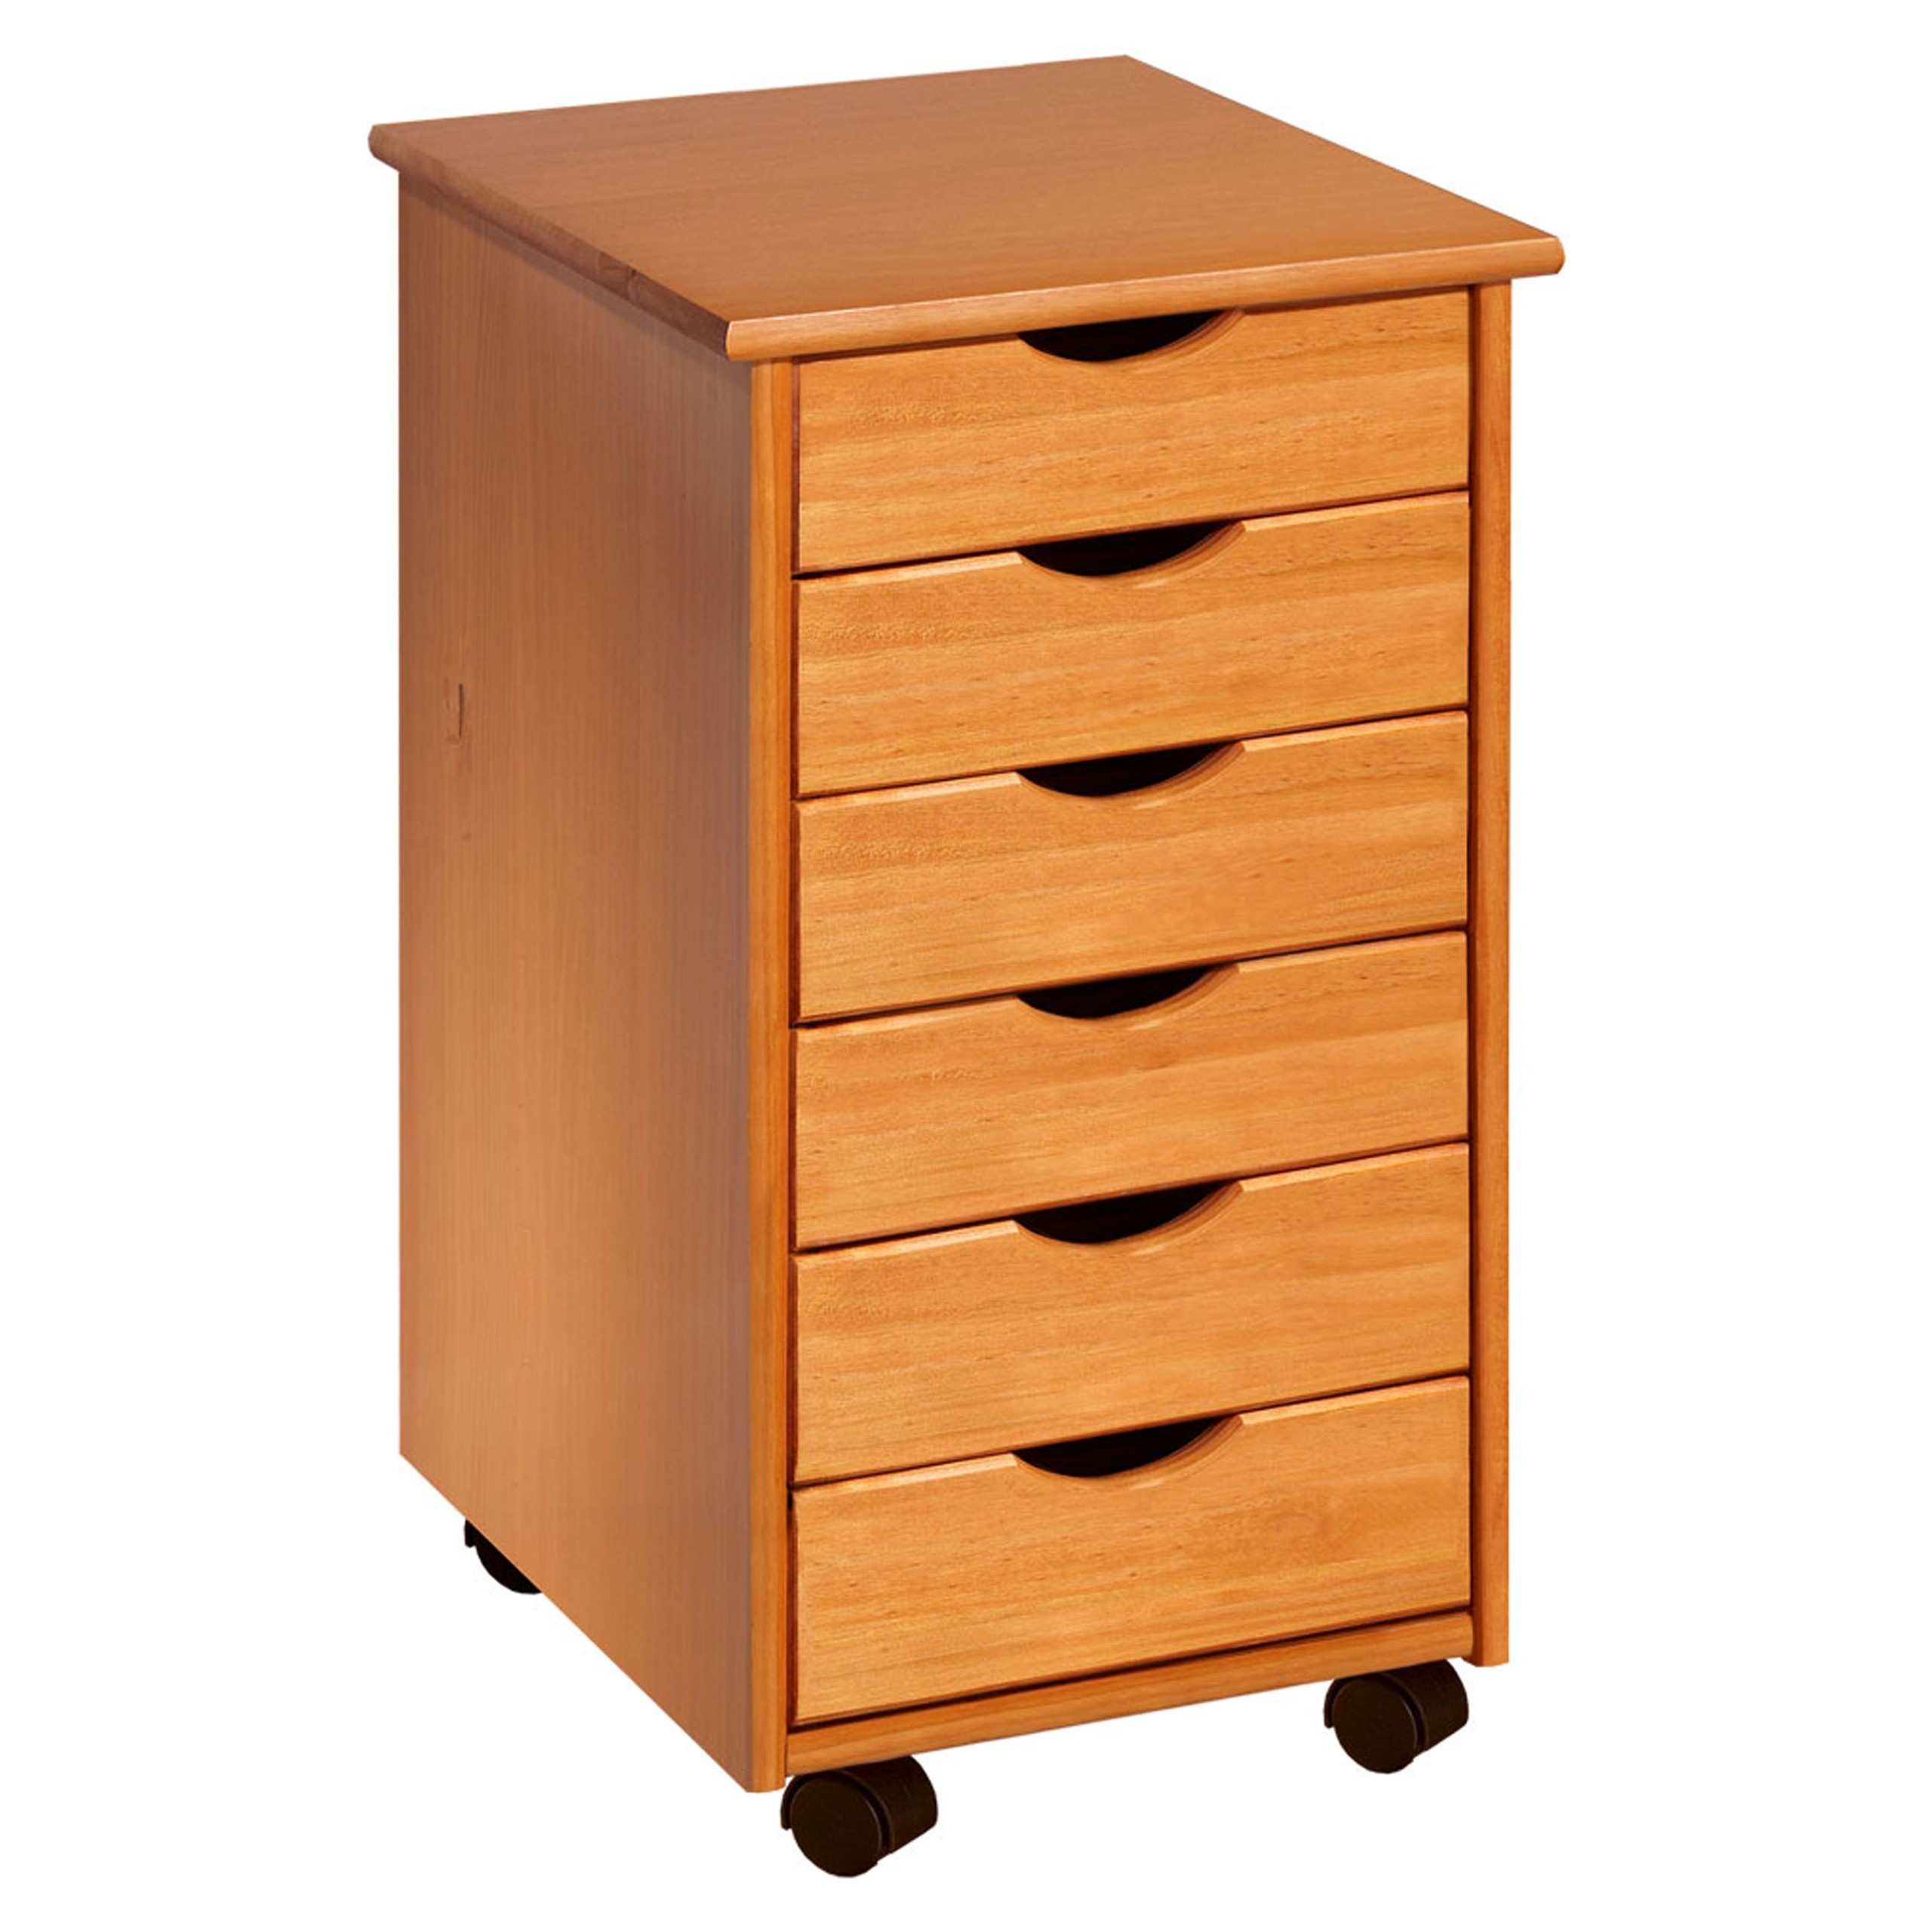 Small Drawer Cabinets - Foter